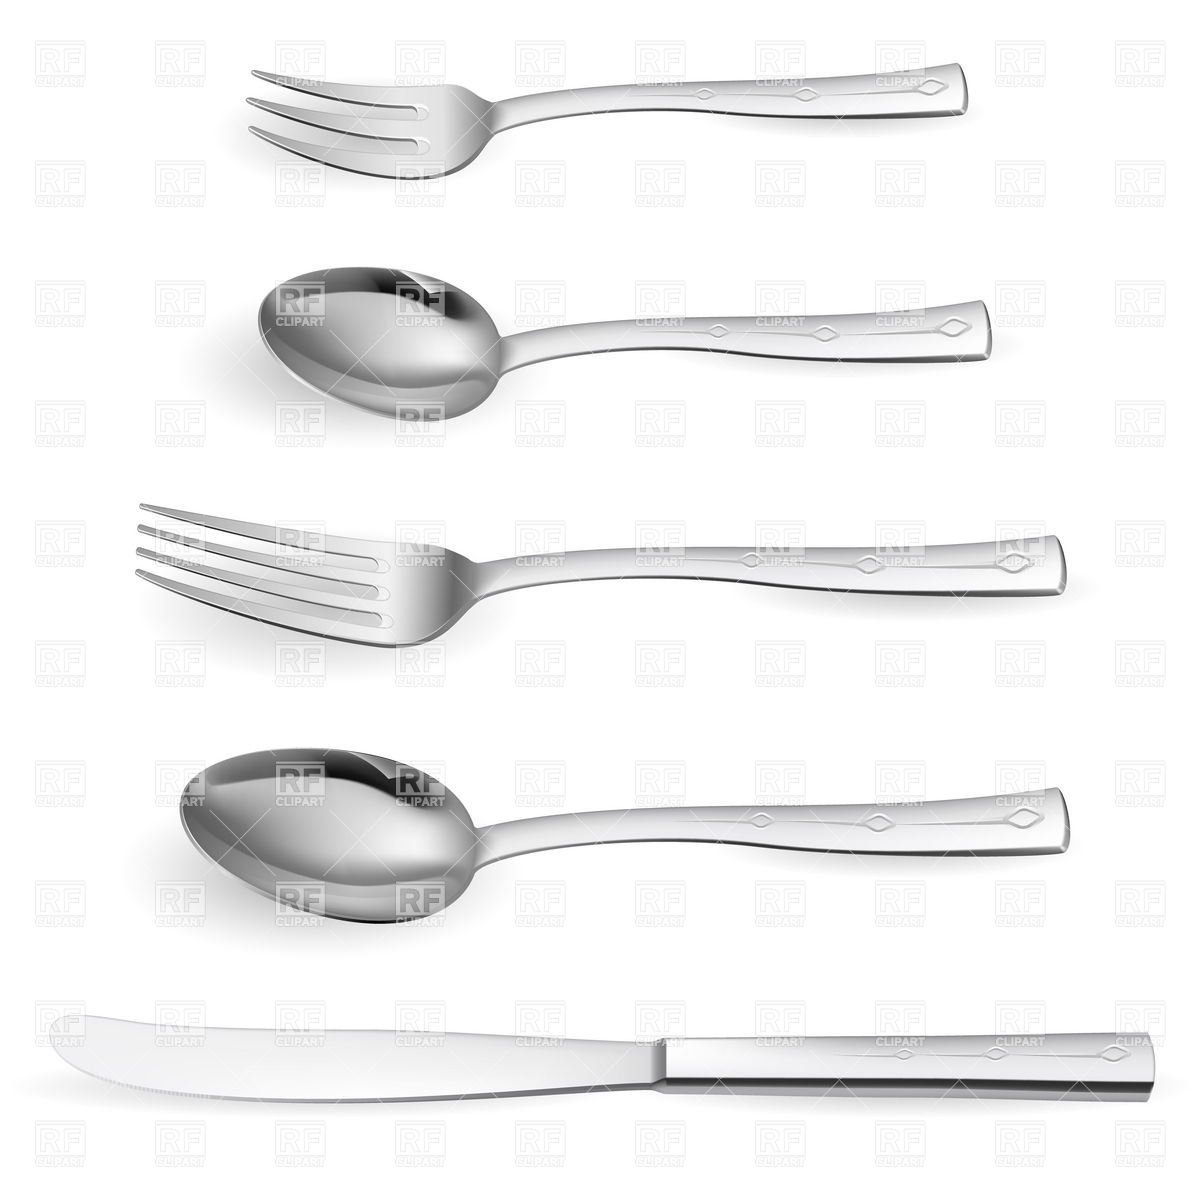 Silverware   Set Of Spoons Forks And Balance Knife Objects Download